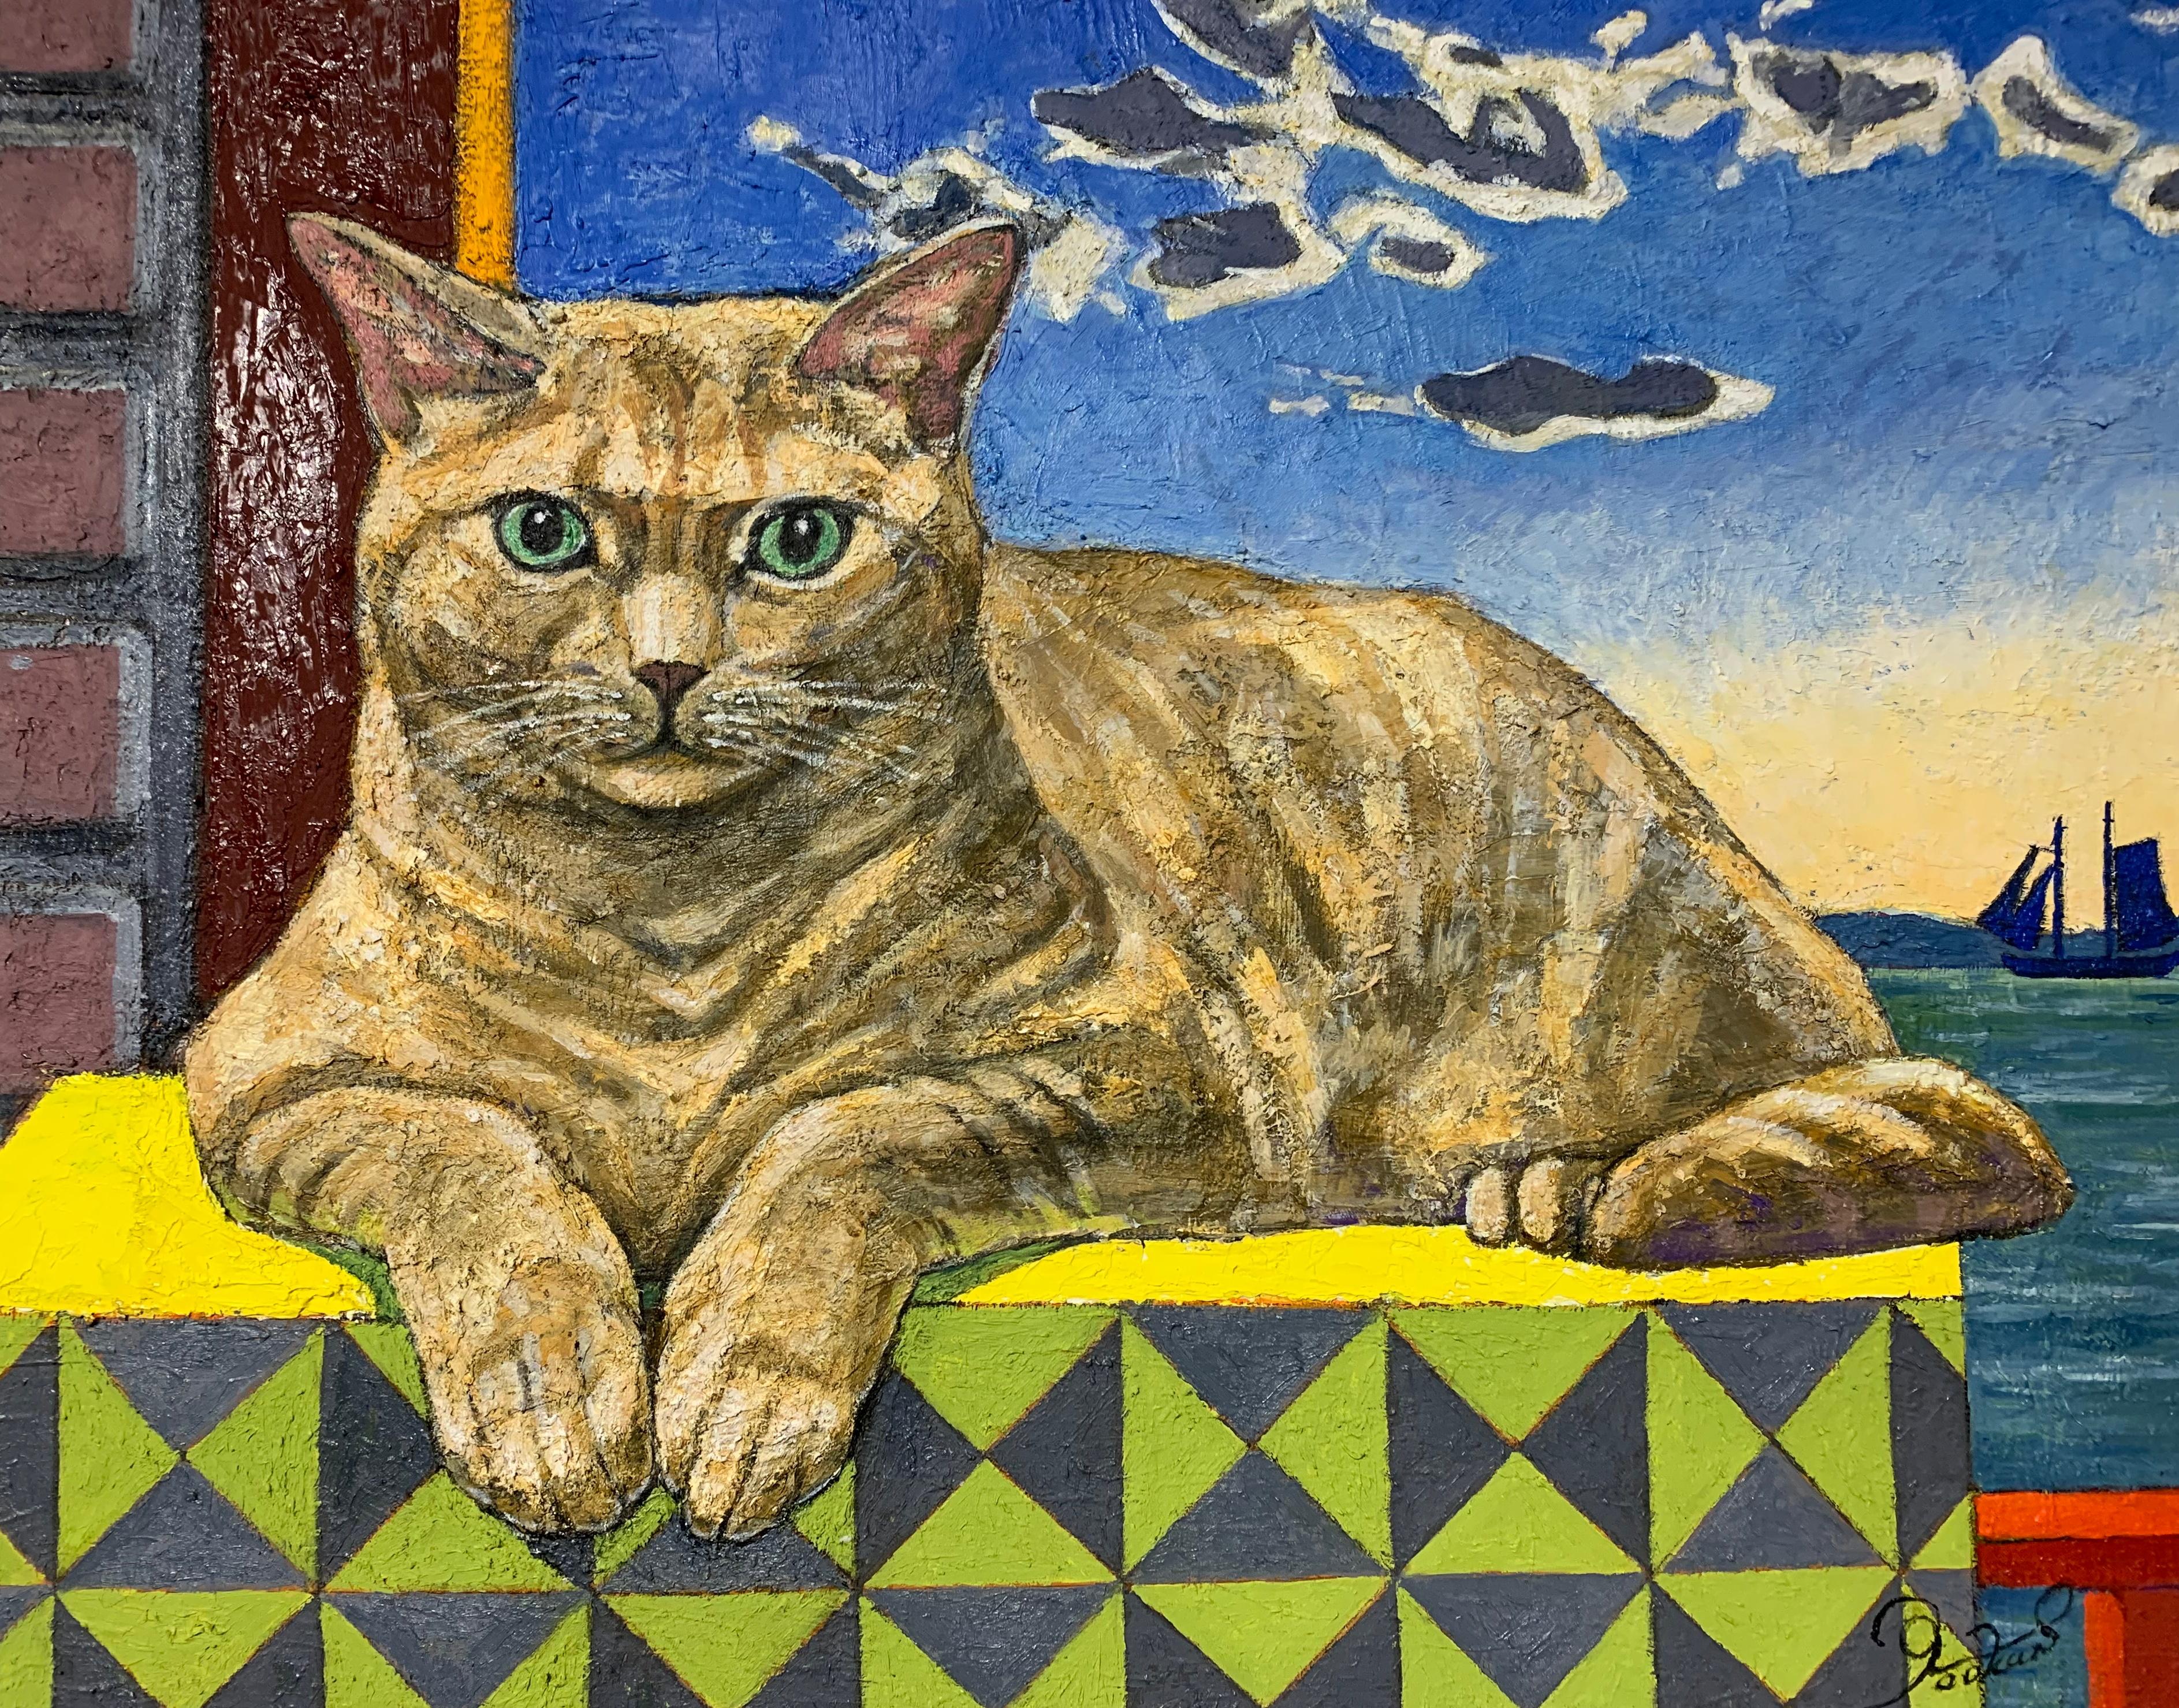 Orange Cat's Thoughts (original painting by renowned Japanese American painter) - Painting by Yookan Westfield